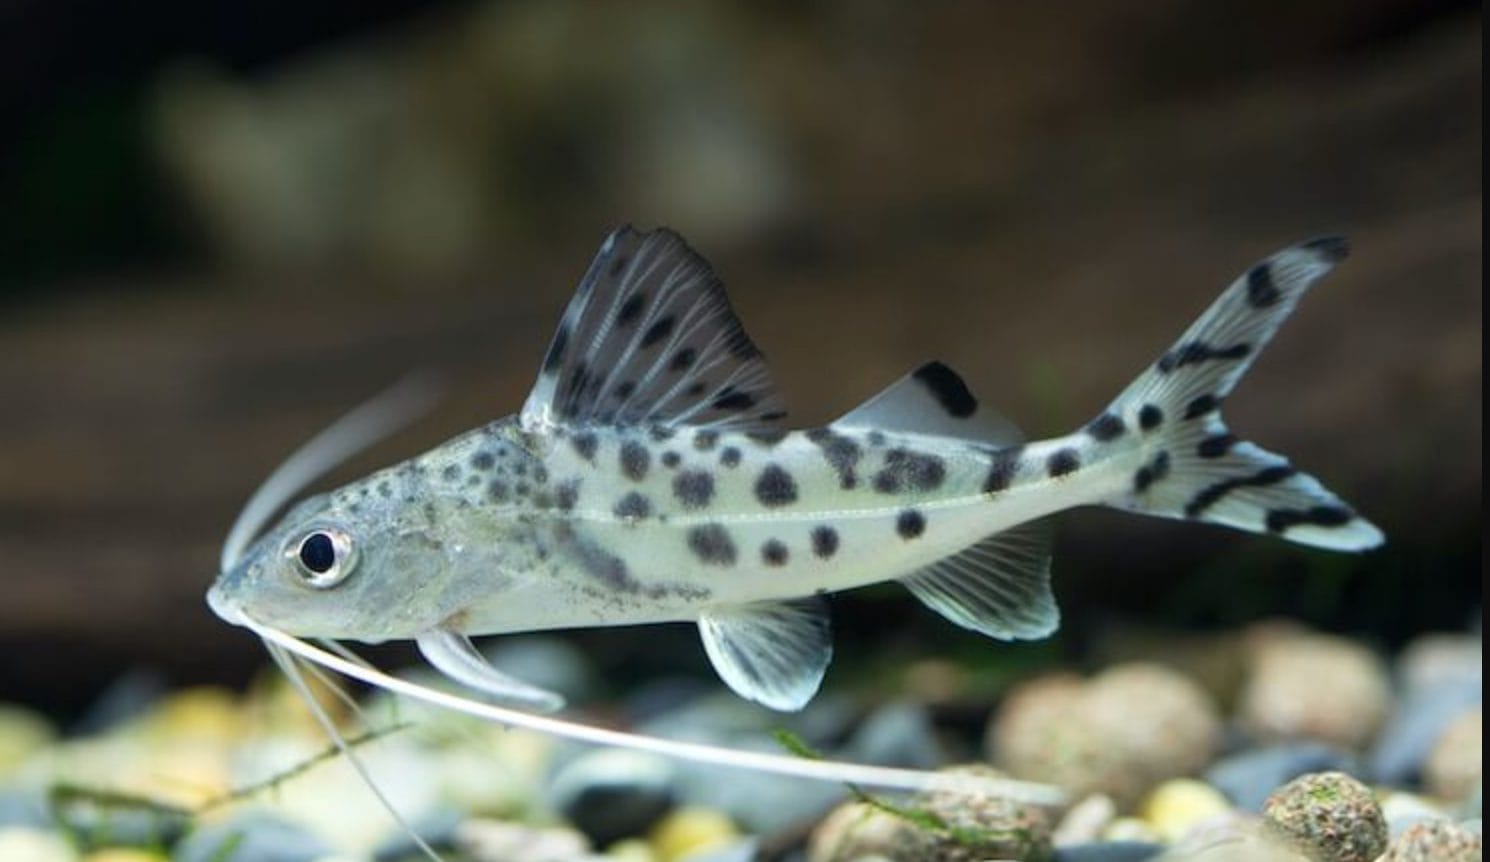 Complete Guide to Take Care of Pictus Catfish in a Tank